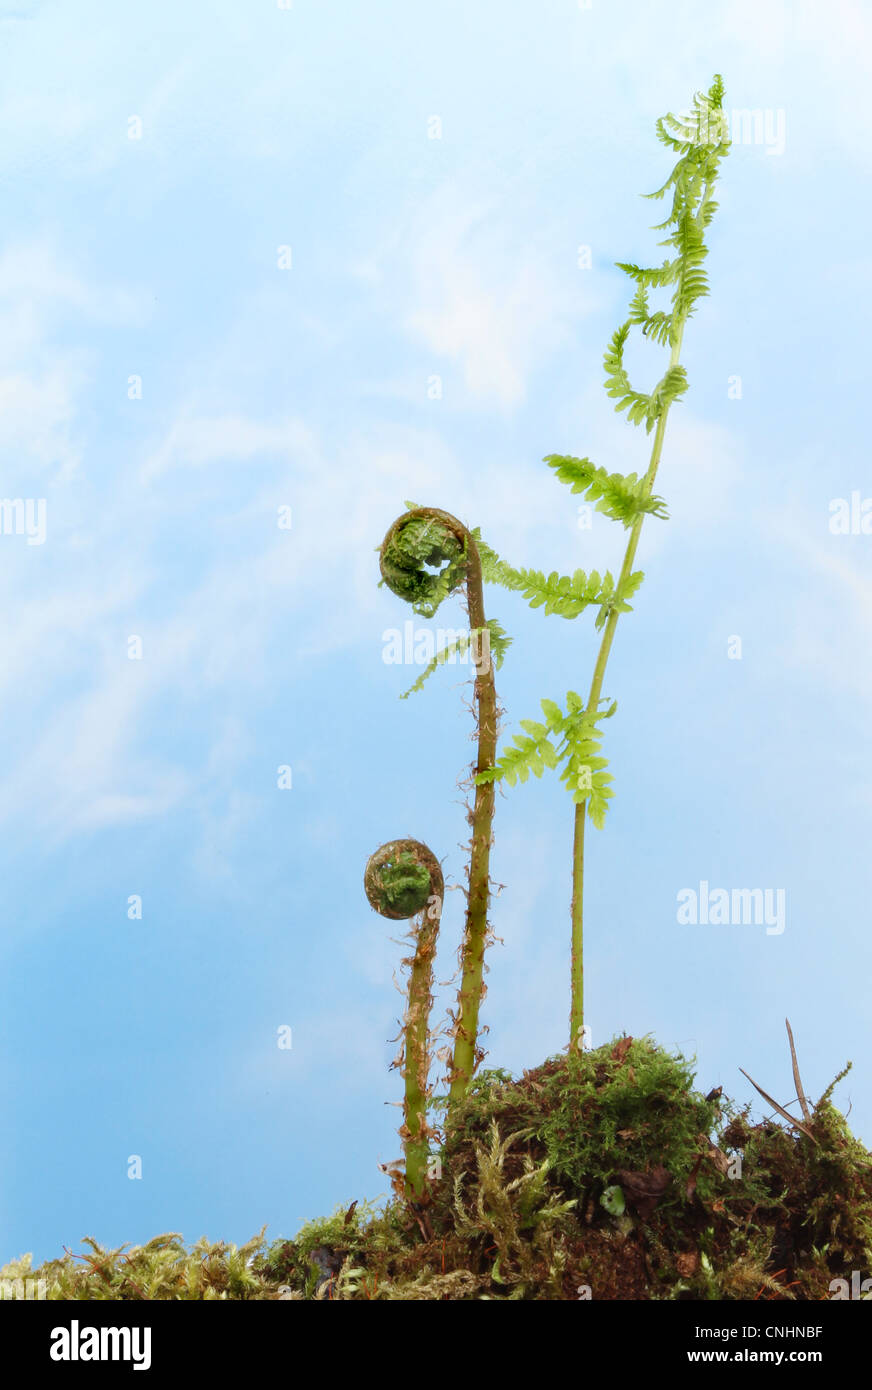 Fresh young fern fronds growing from moss covered soil against blue sky with soft clouds Stock Photo